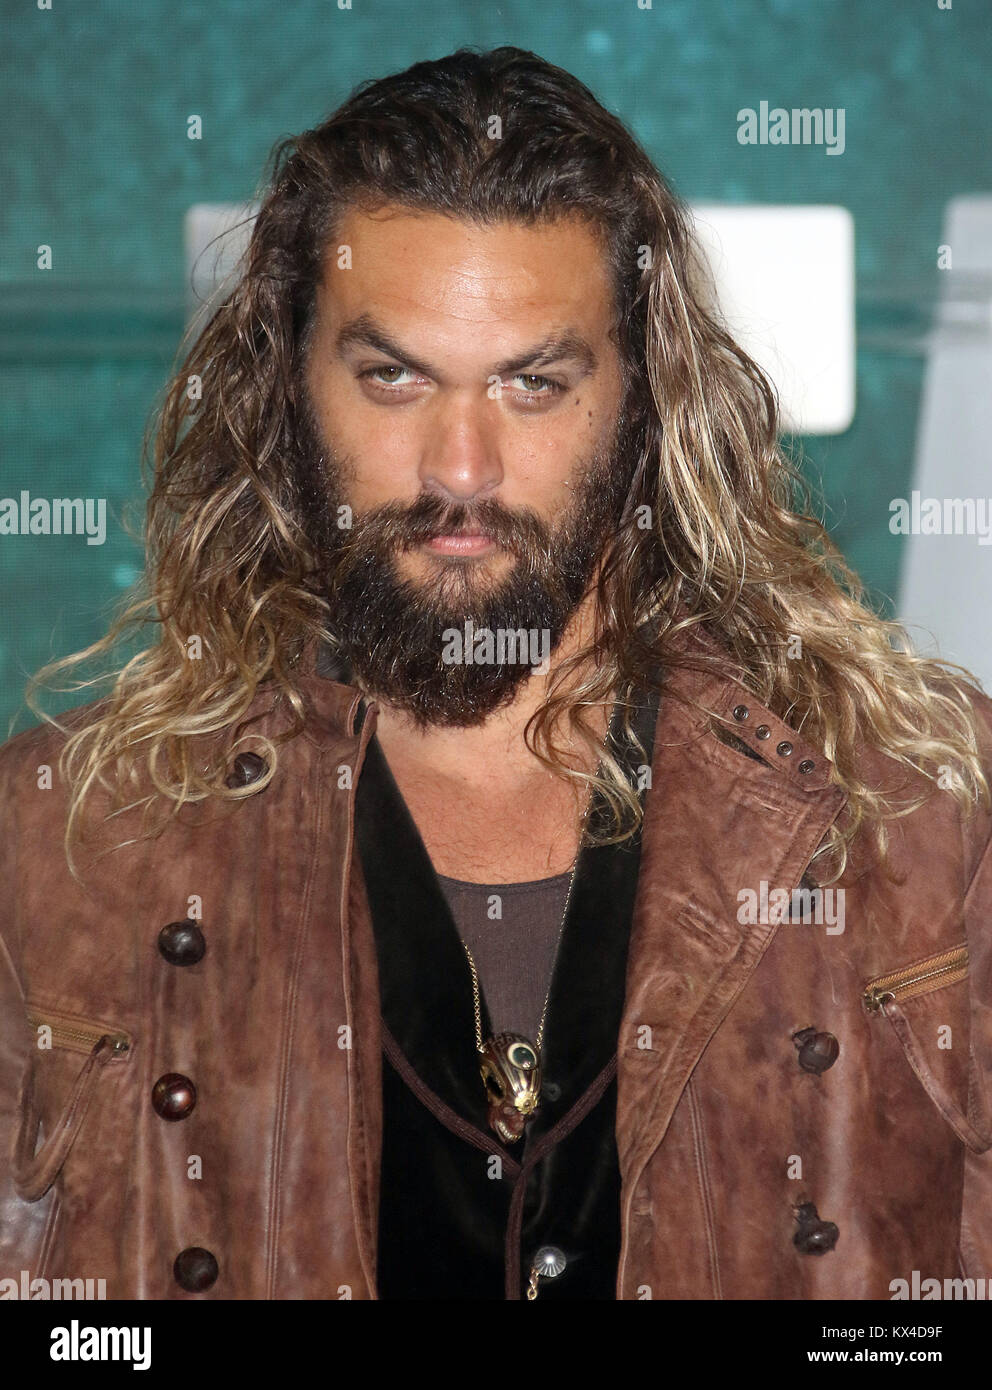 Nov 04, 2017 - Jason Momoa attending 'Justice League' Photocall, The College, Southampton Row in London, England, UK Stock Photo